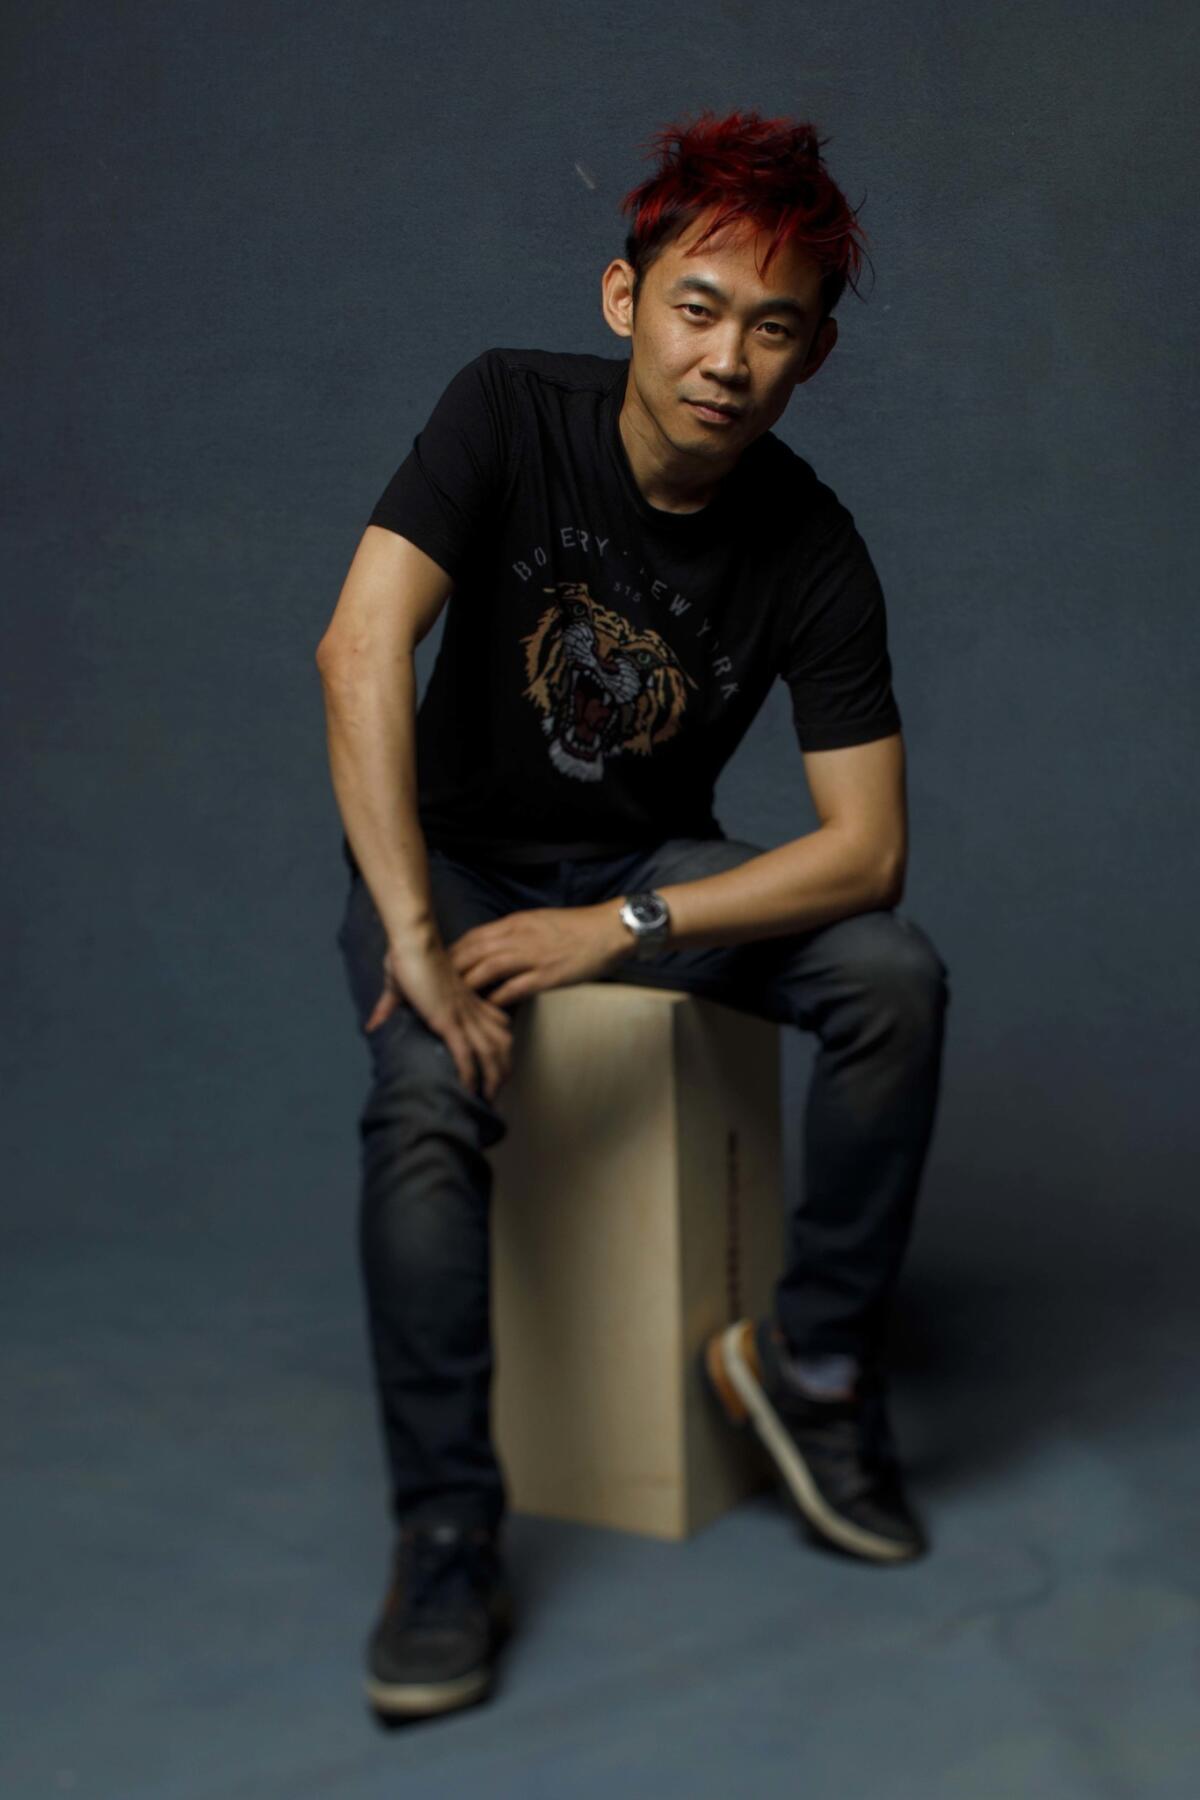 Director James Wan from the film "Aquaman."